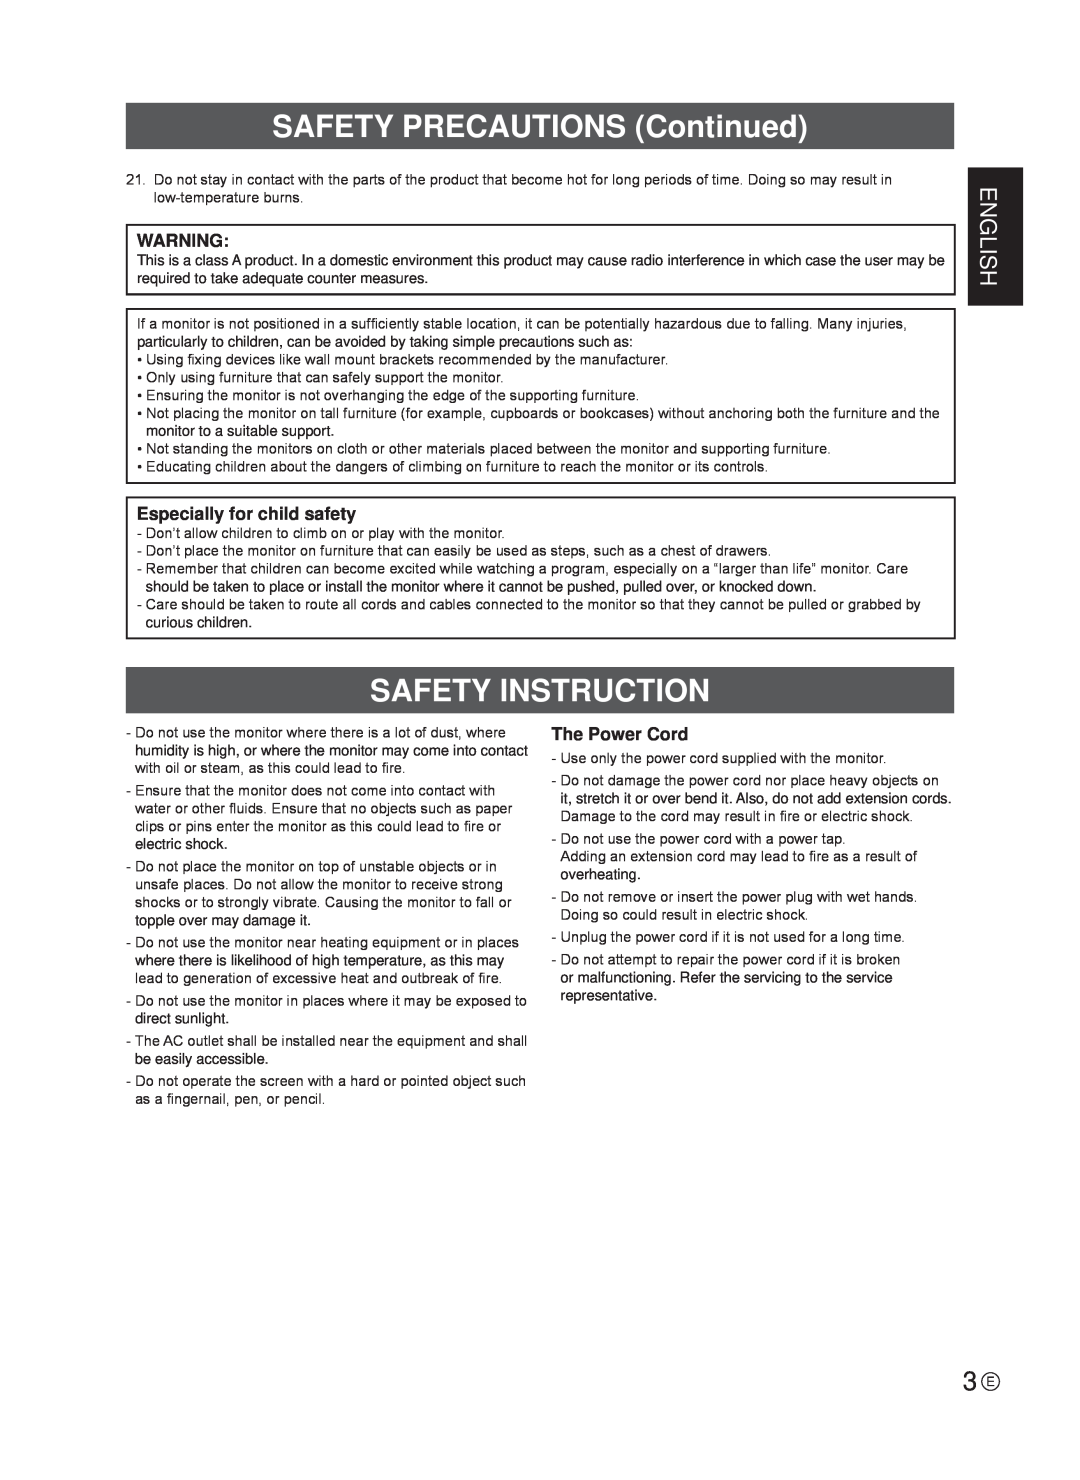 Sharp TINSE1181MPZZ(2) SAFETY PRECAUTIONS Continued, Safety Instruction, Especially for child safety, The Power Cord 